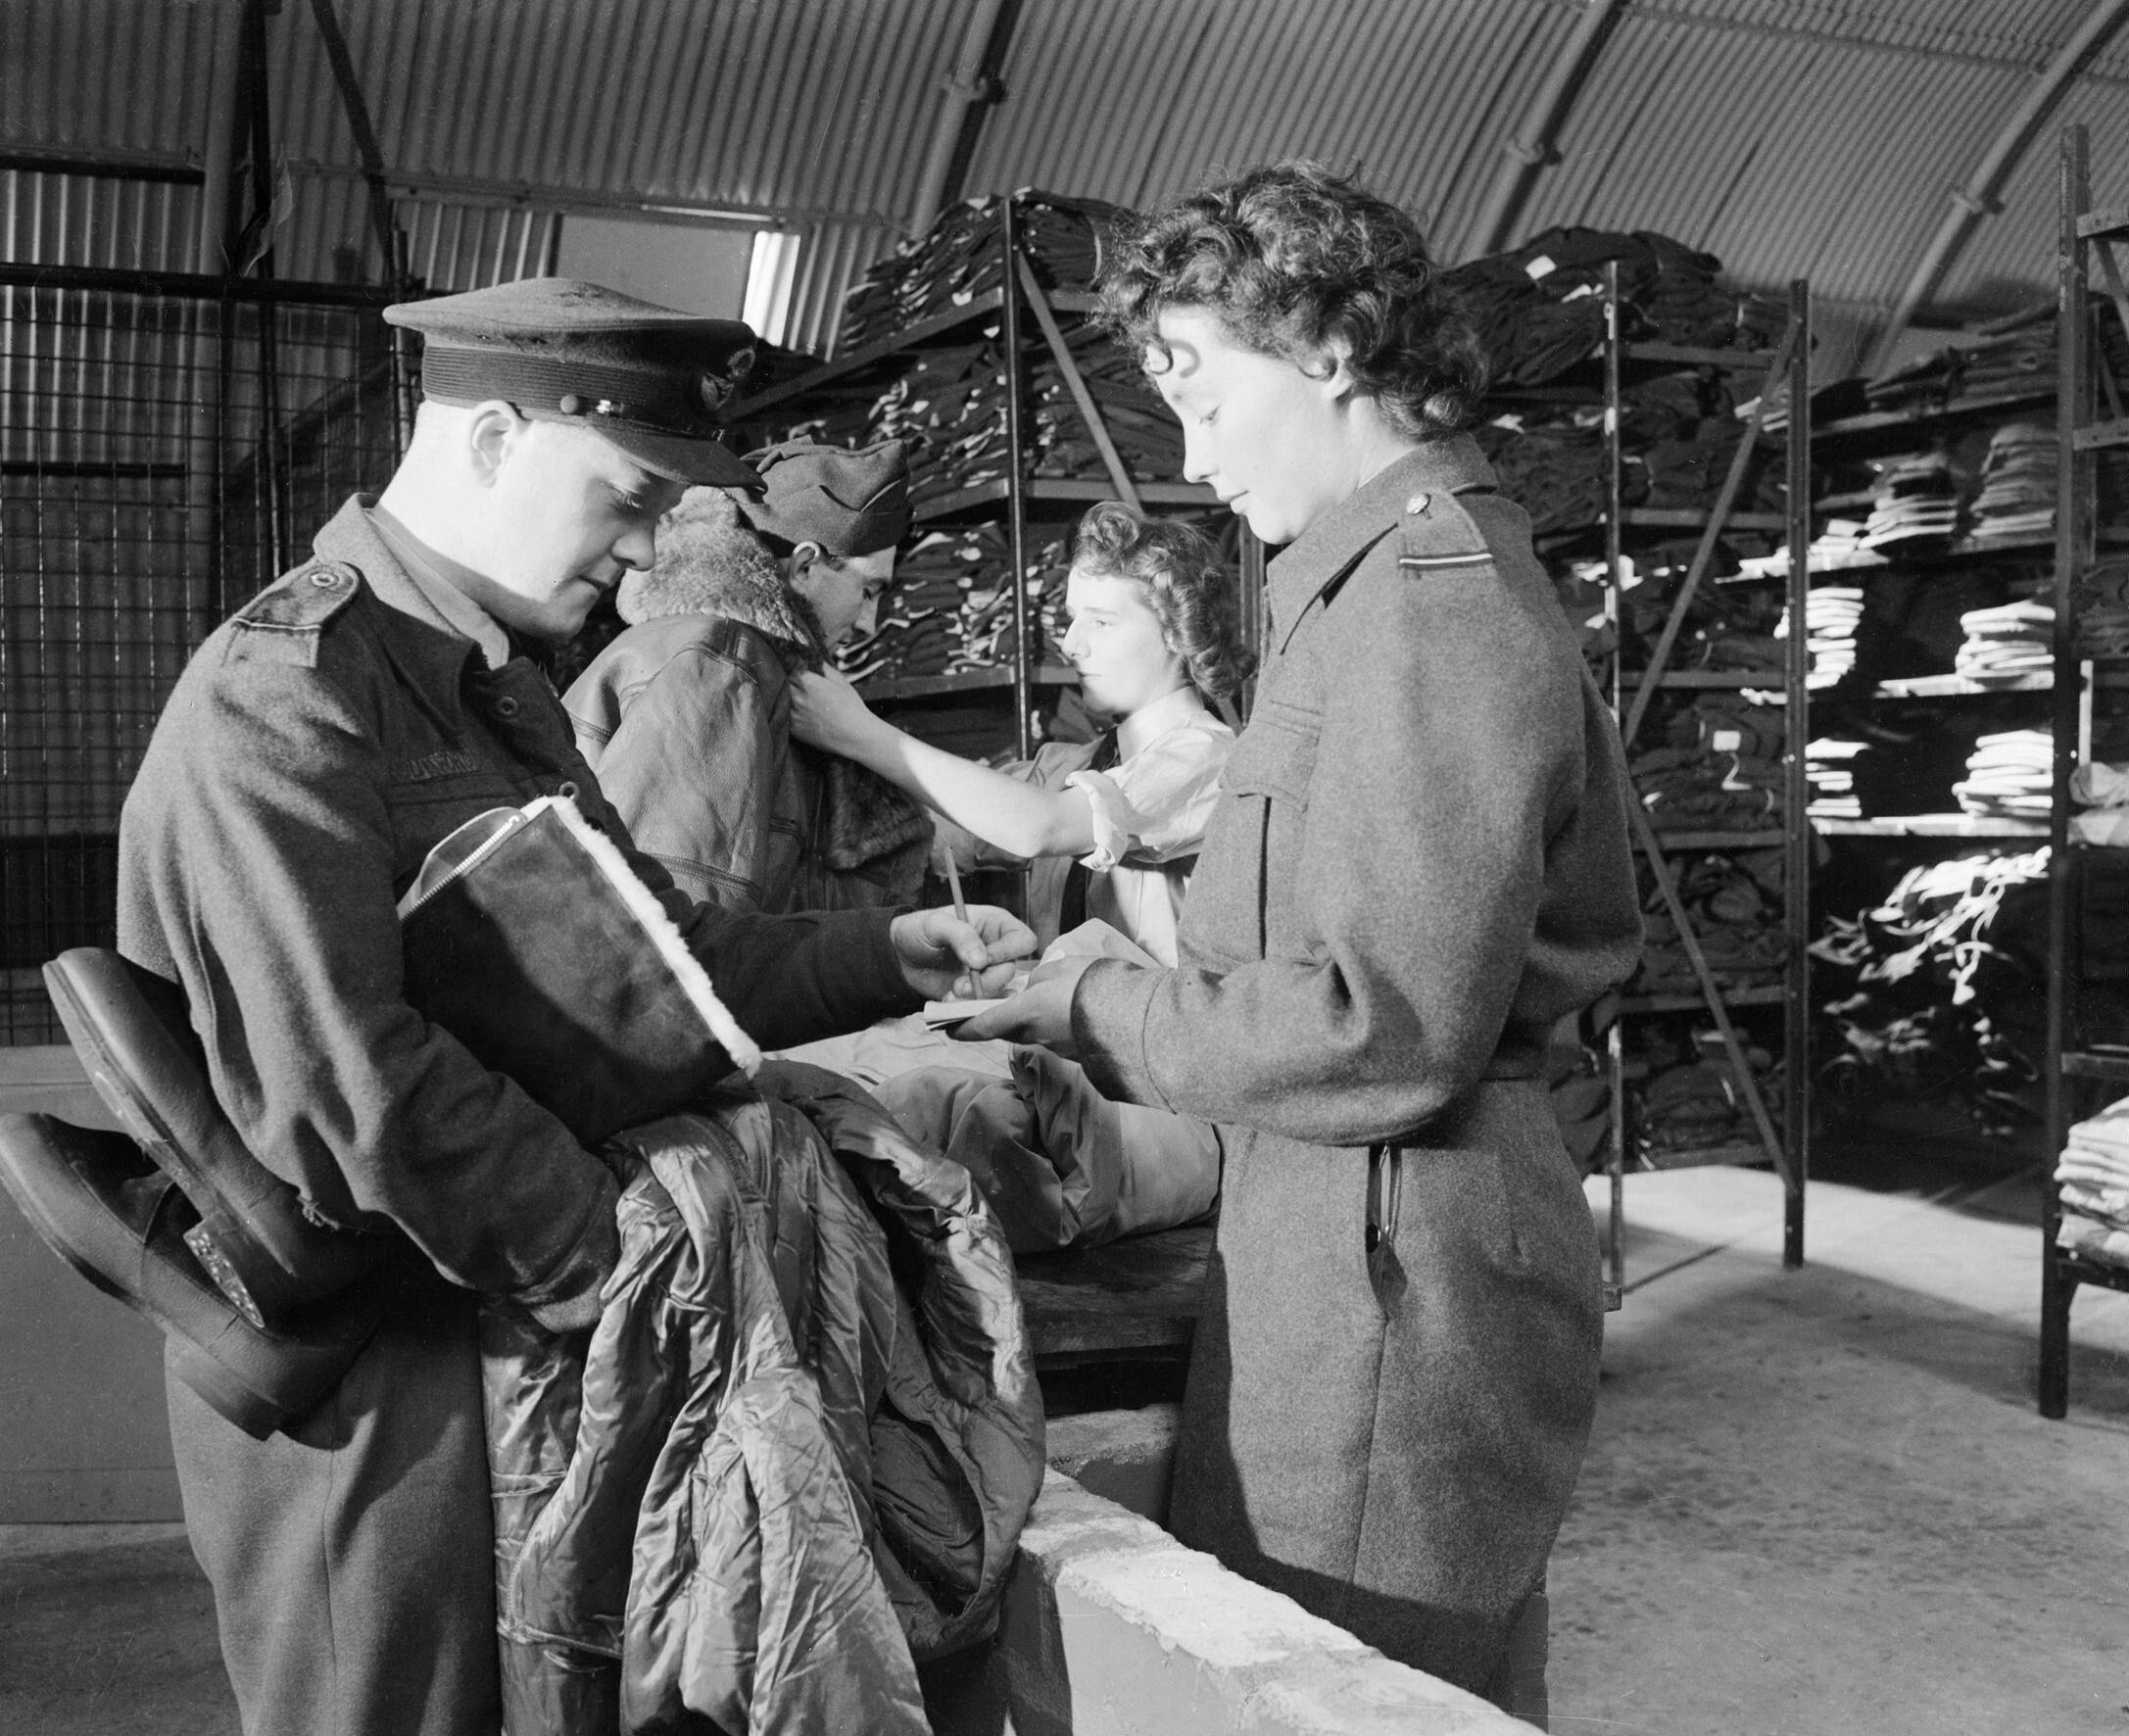 A WAAF section officer and her assistant issuing electrically-heated waist coat, 1940-pattern boots, and Irvin sheepskin flying jacket (background) to RAF bomber crewmembers, United Kingdom, Aug 1944